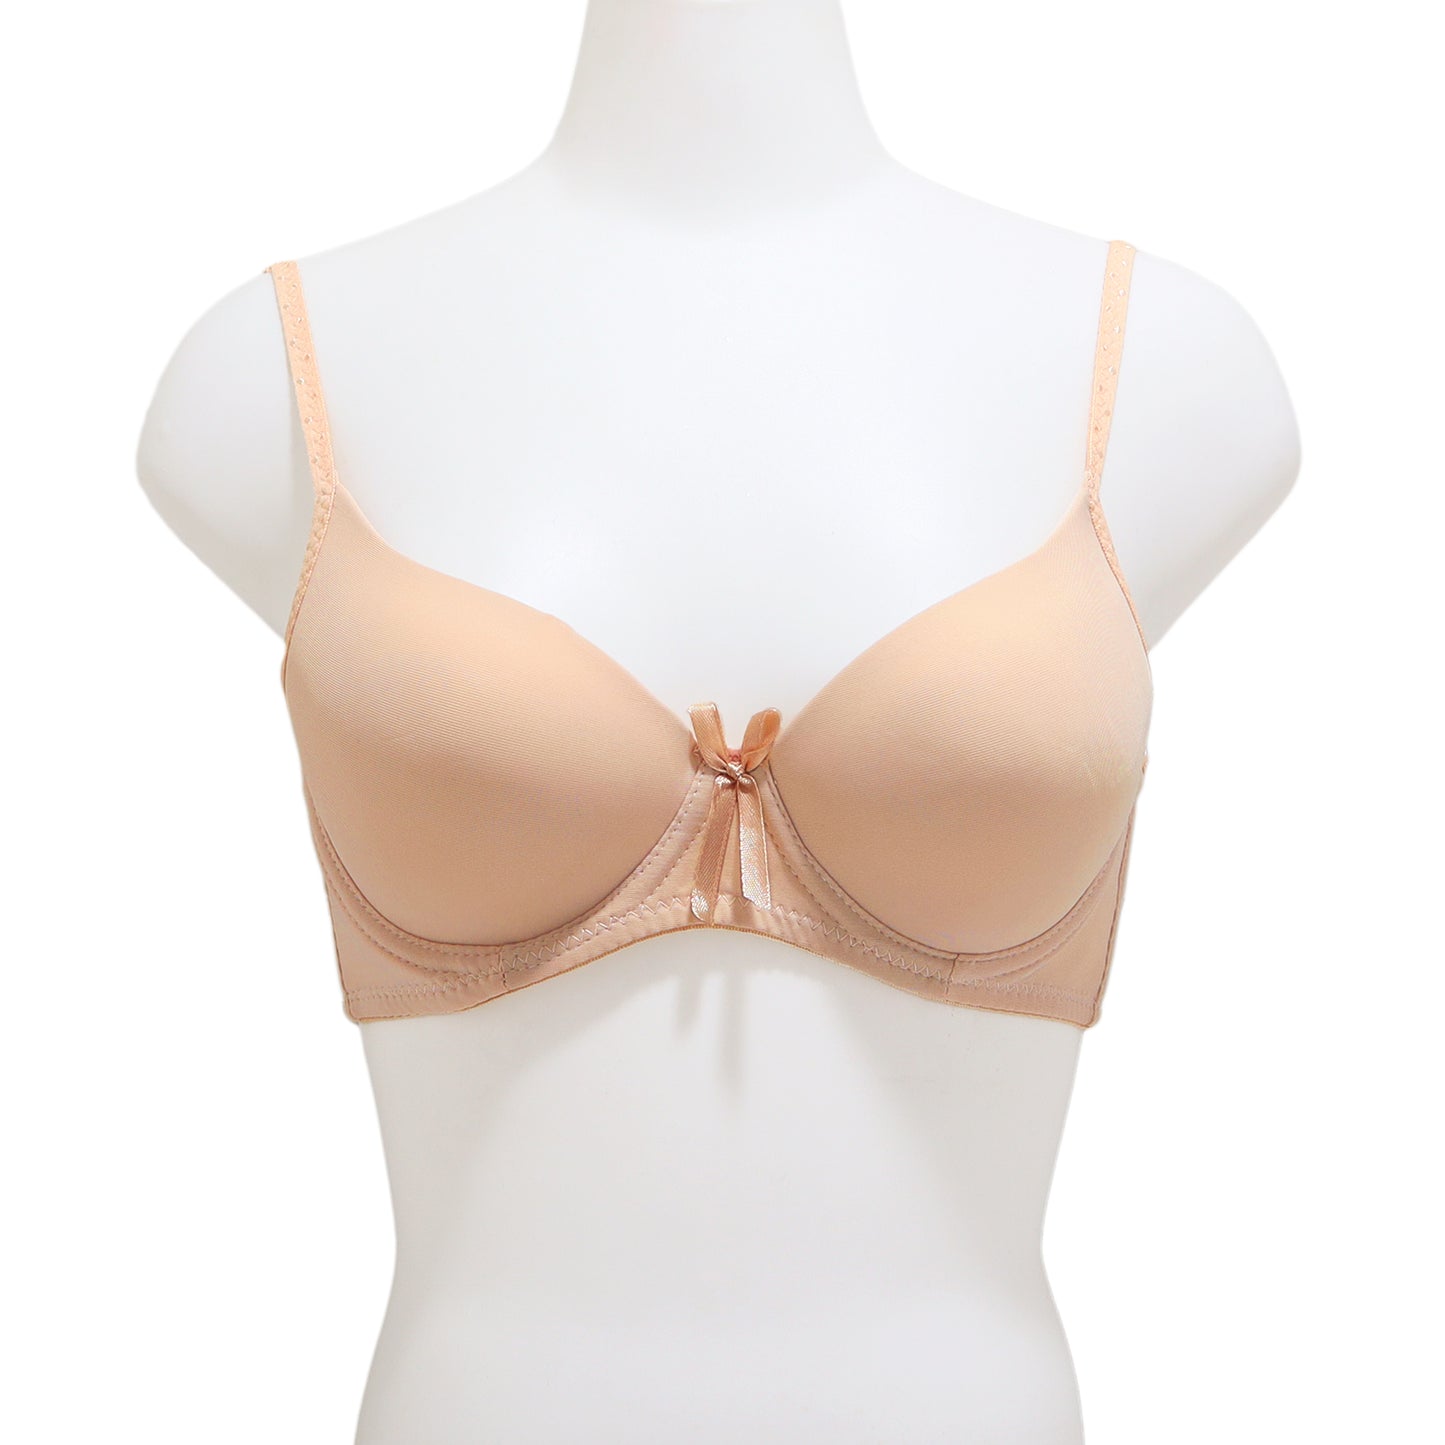 Angelina Wired, Push-Up Padded Bras with Adjustable Straps (6-Pack), #B360A